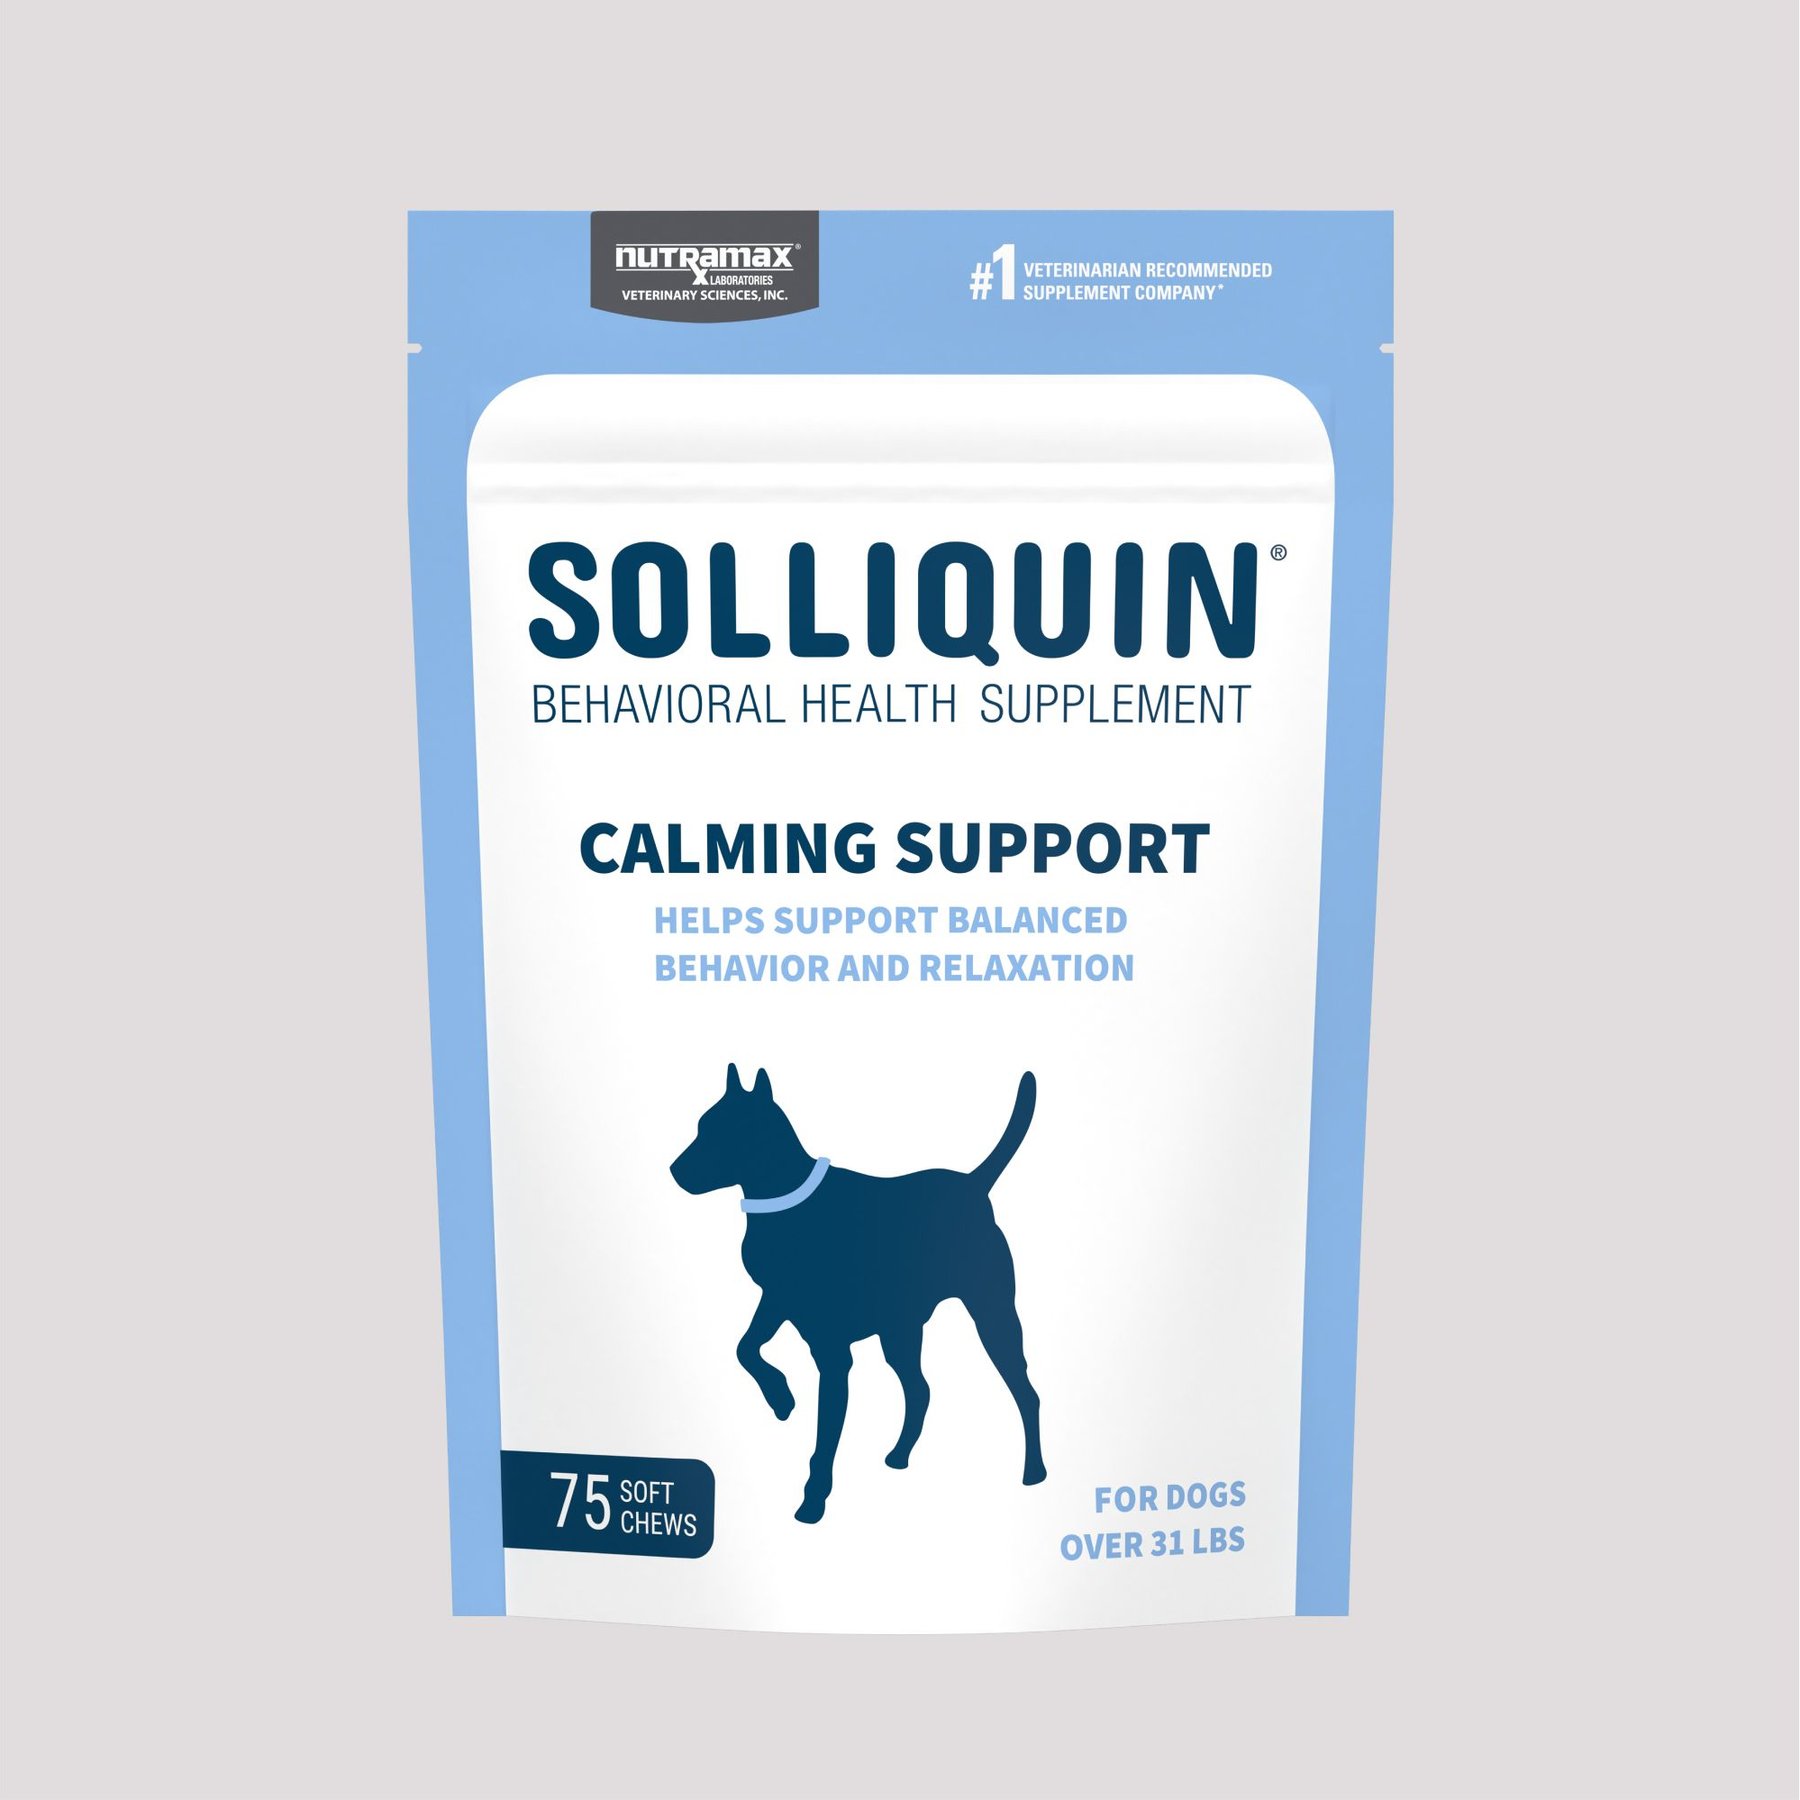 Horse Anxiety & Calming Supplements at Tractor Supply Co.